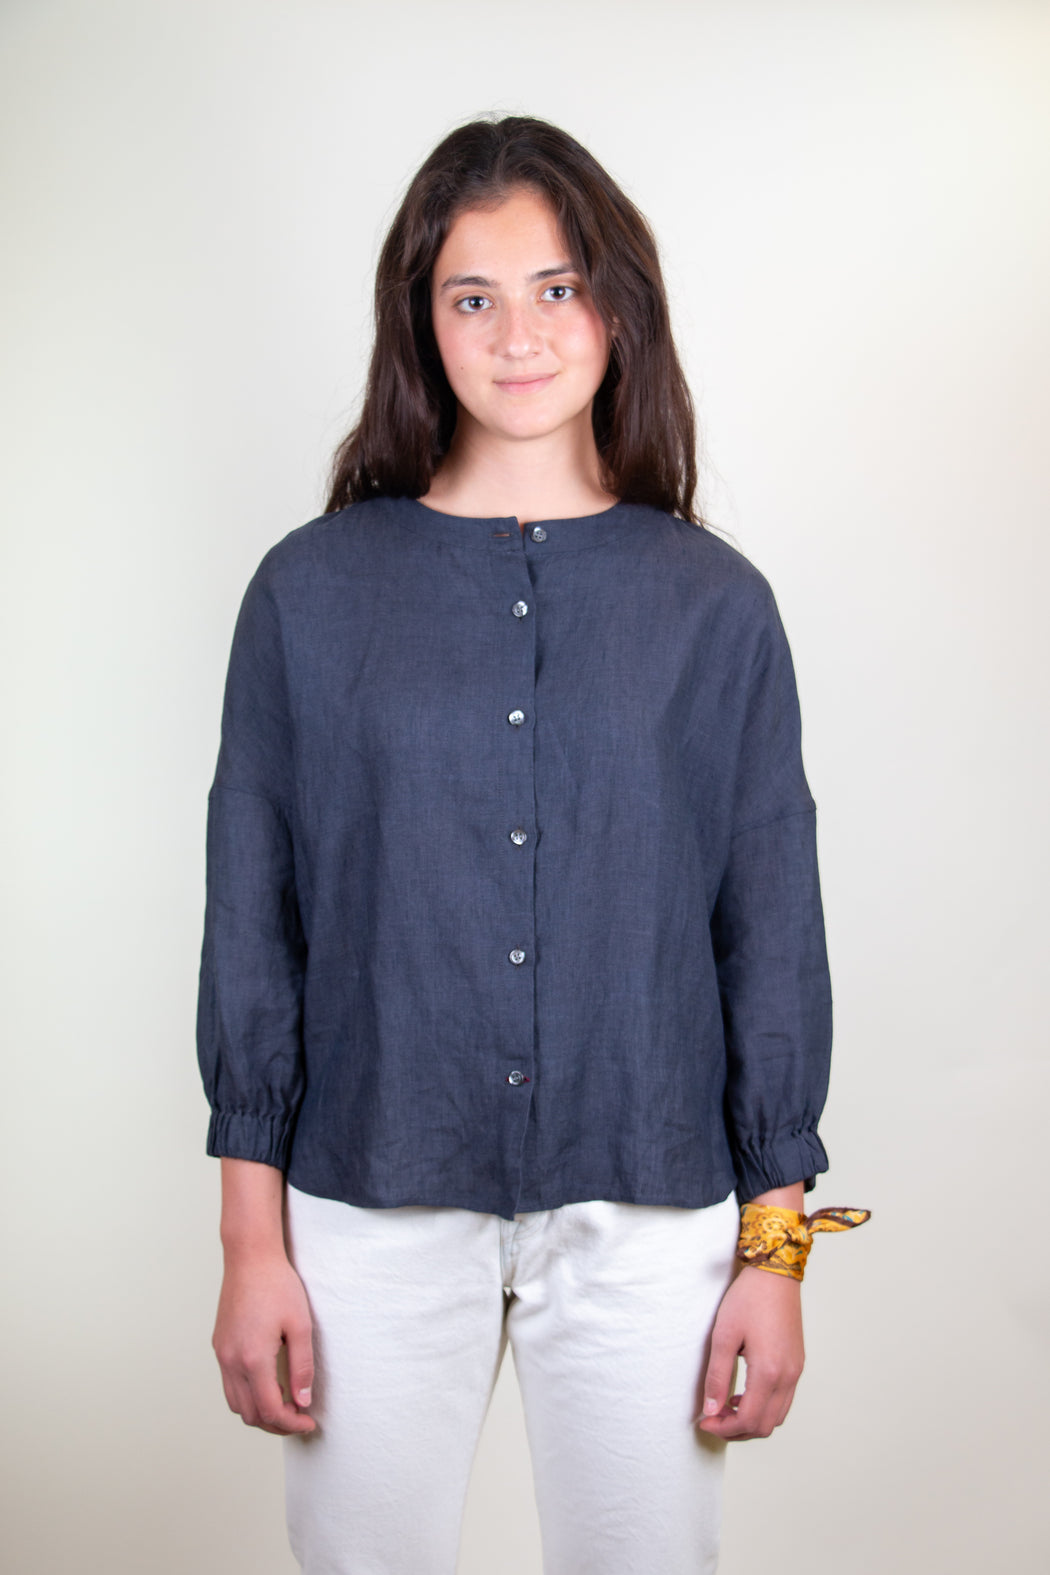 Model wearing blue grey long sleeve shirt with button front